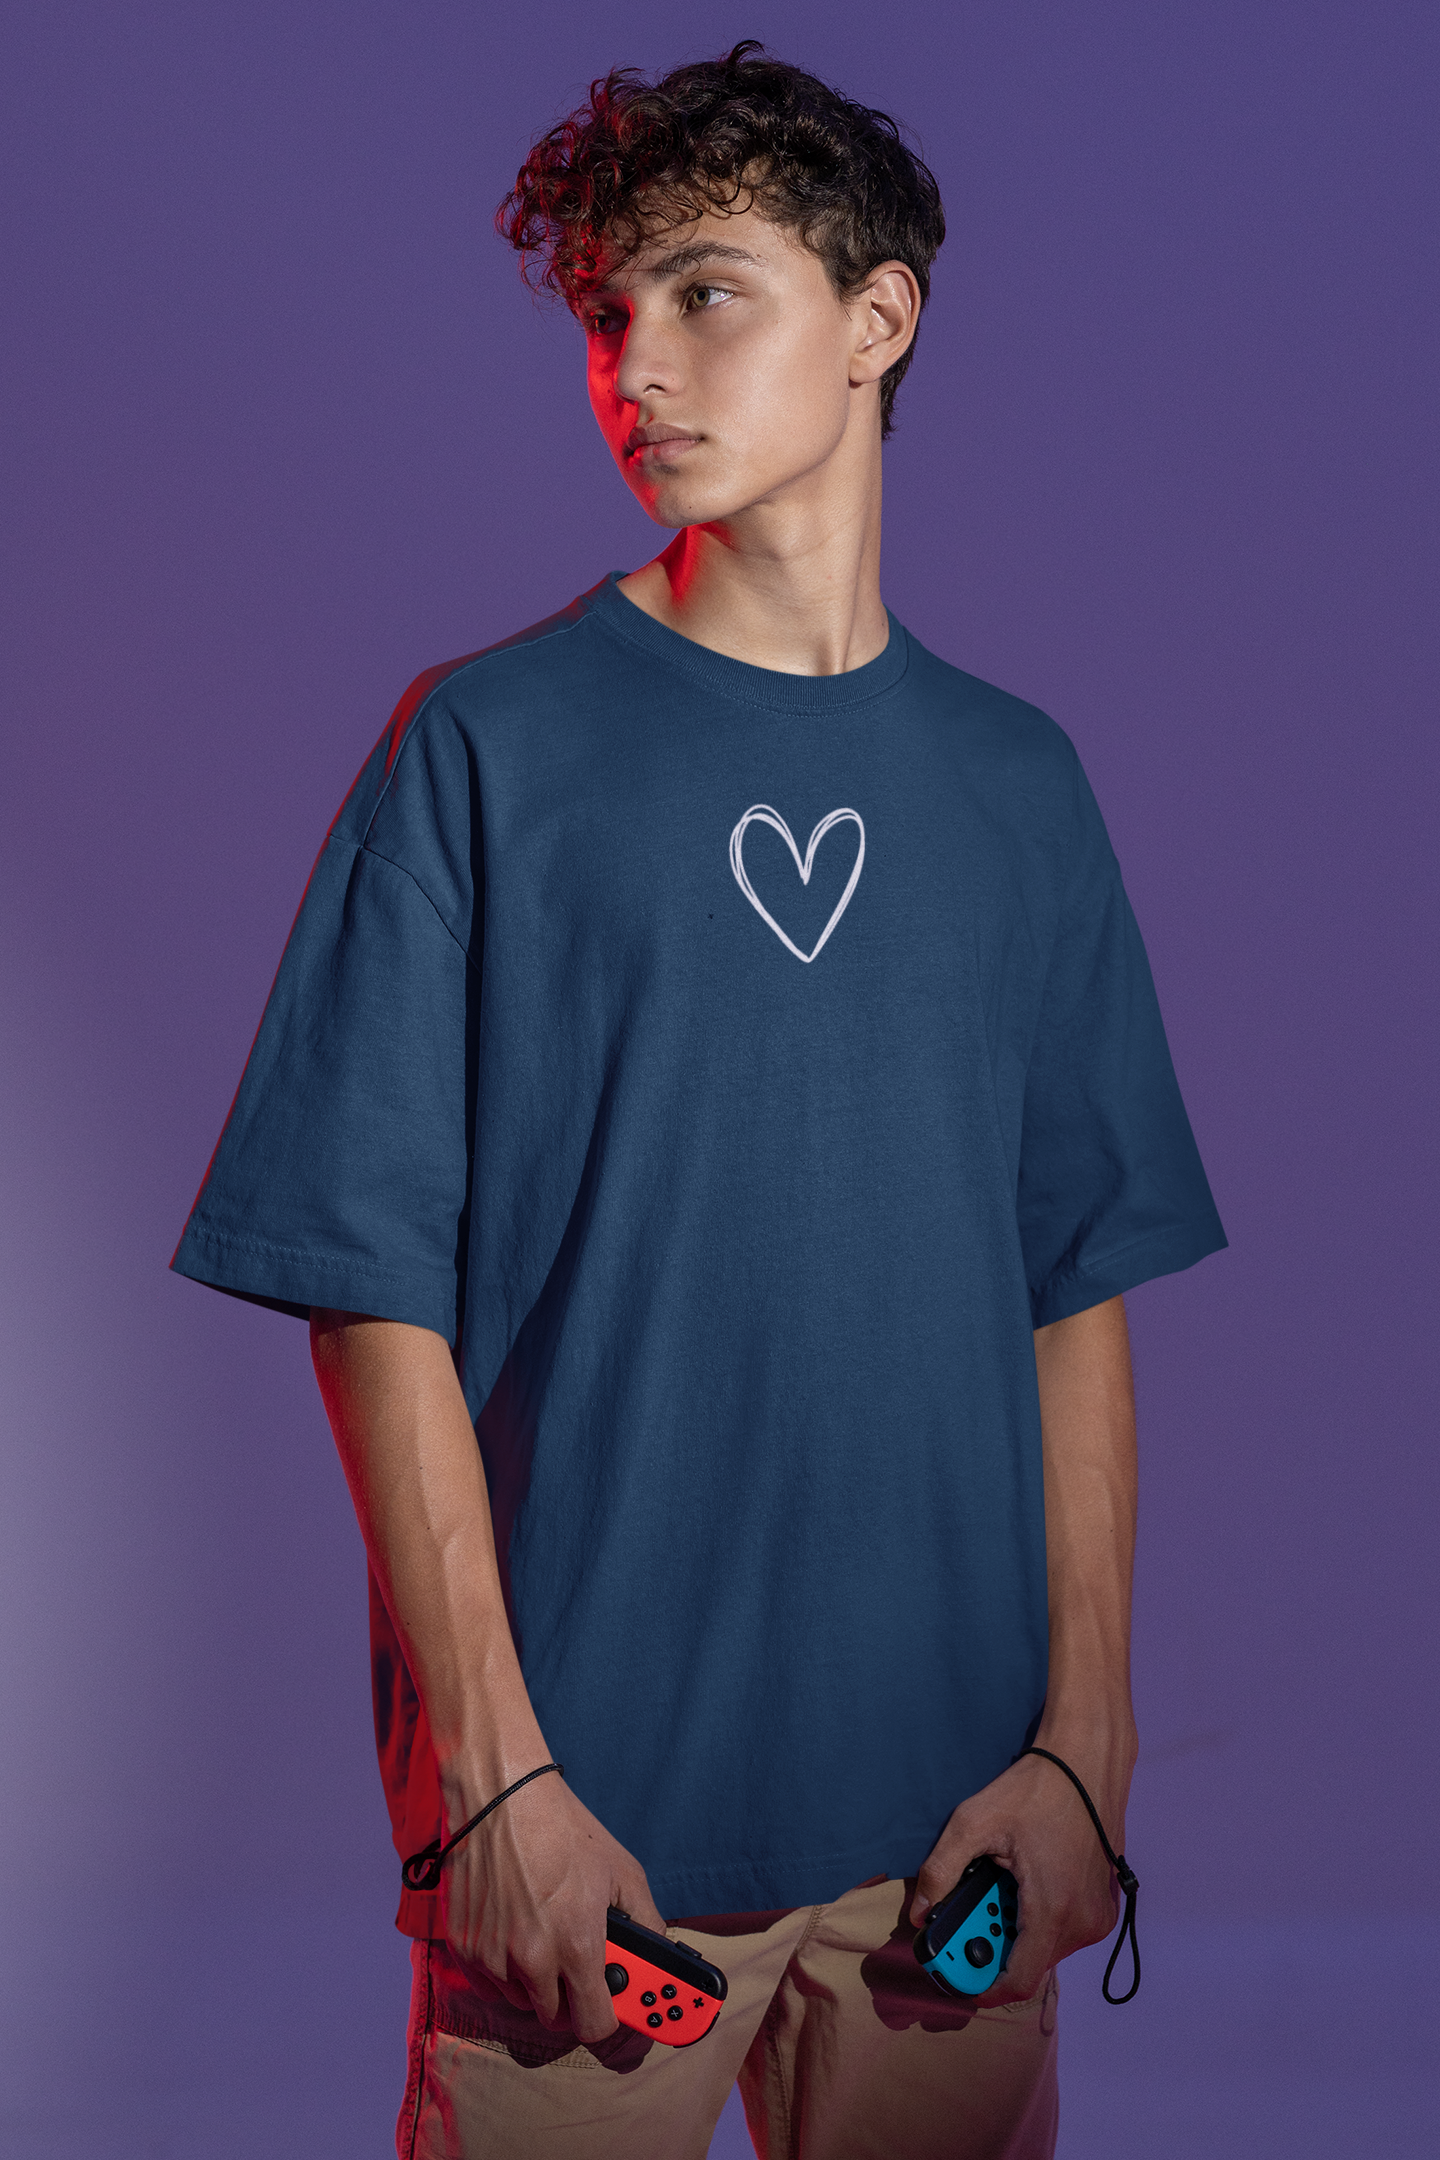 Heart Crop Top and Oversized T-Shirt